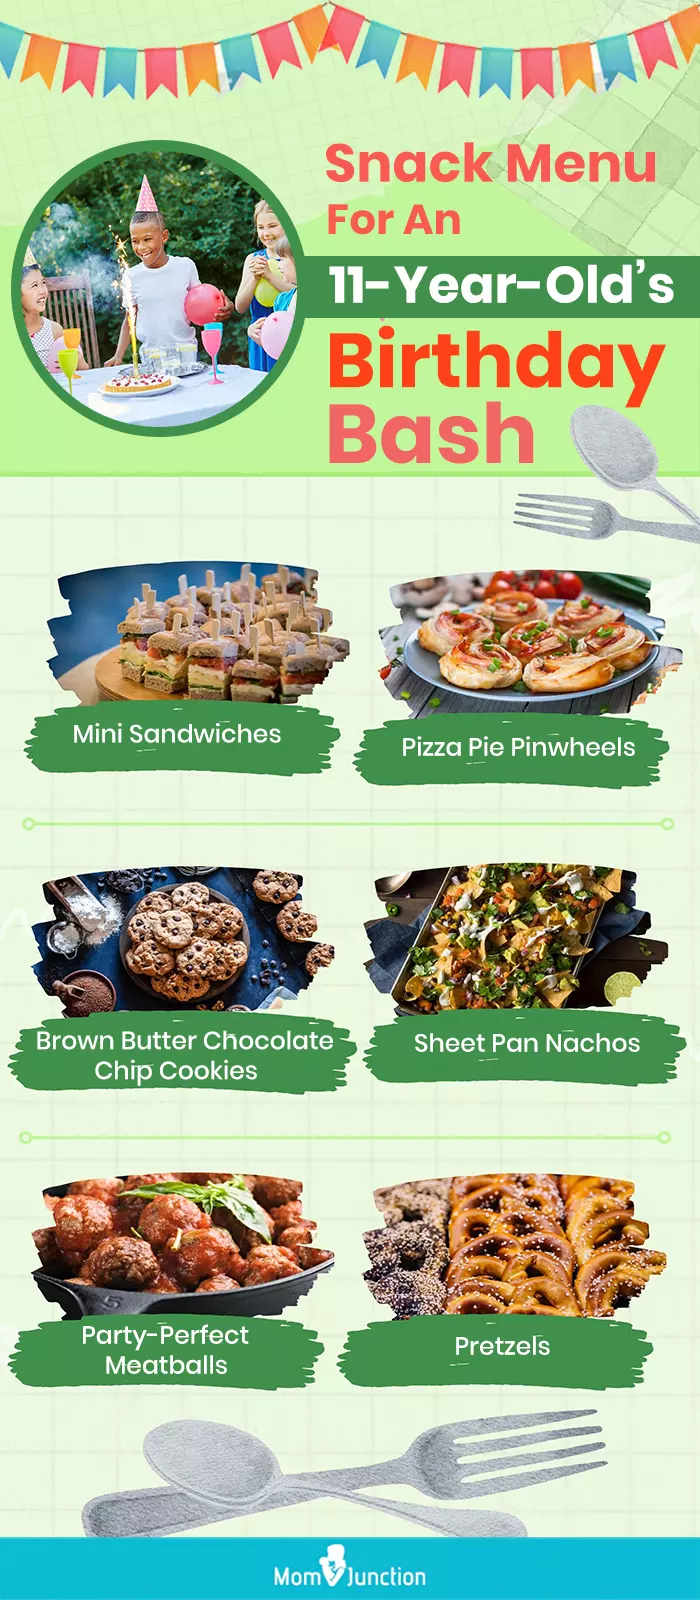 snack ideas for 11 year old birthday (infographic)